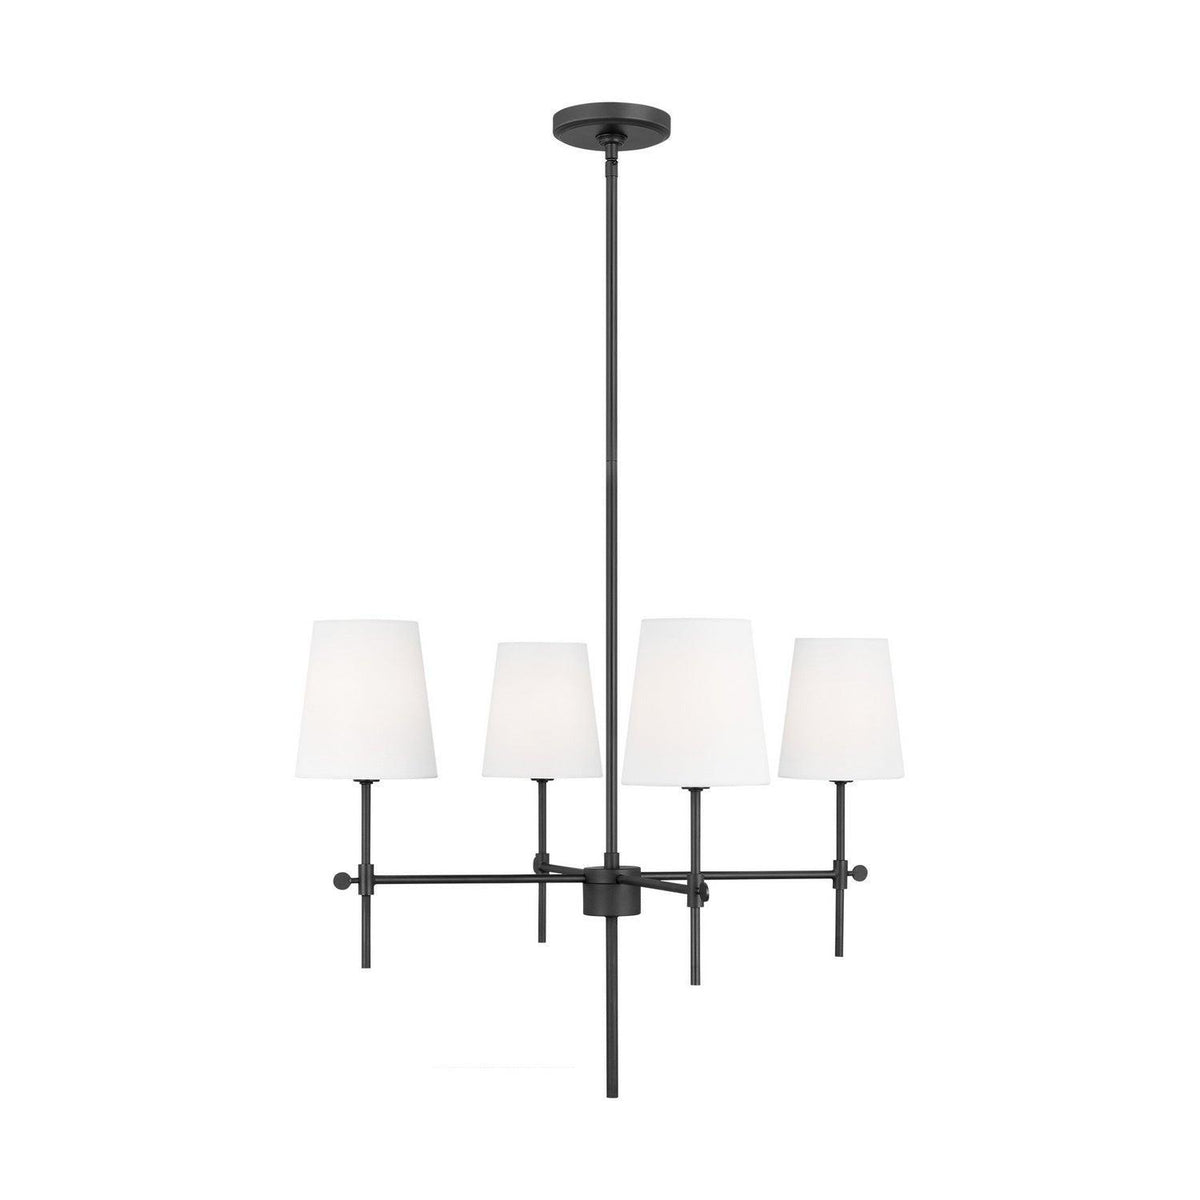 Visual Comfort Studio Collection 3187912EN-848 at Sea Gull Lighting Store  Transitional